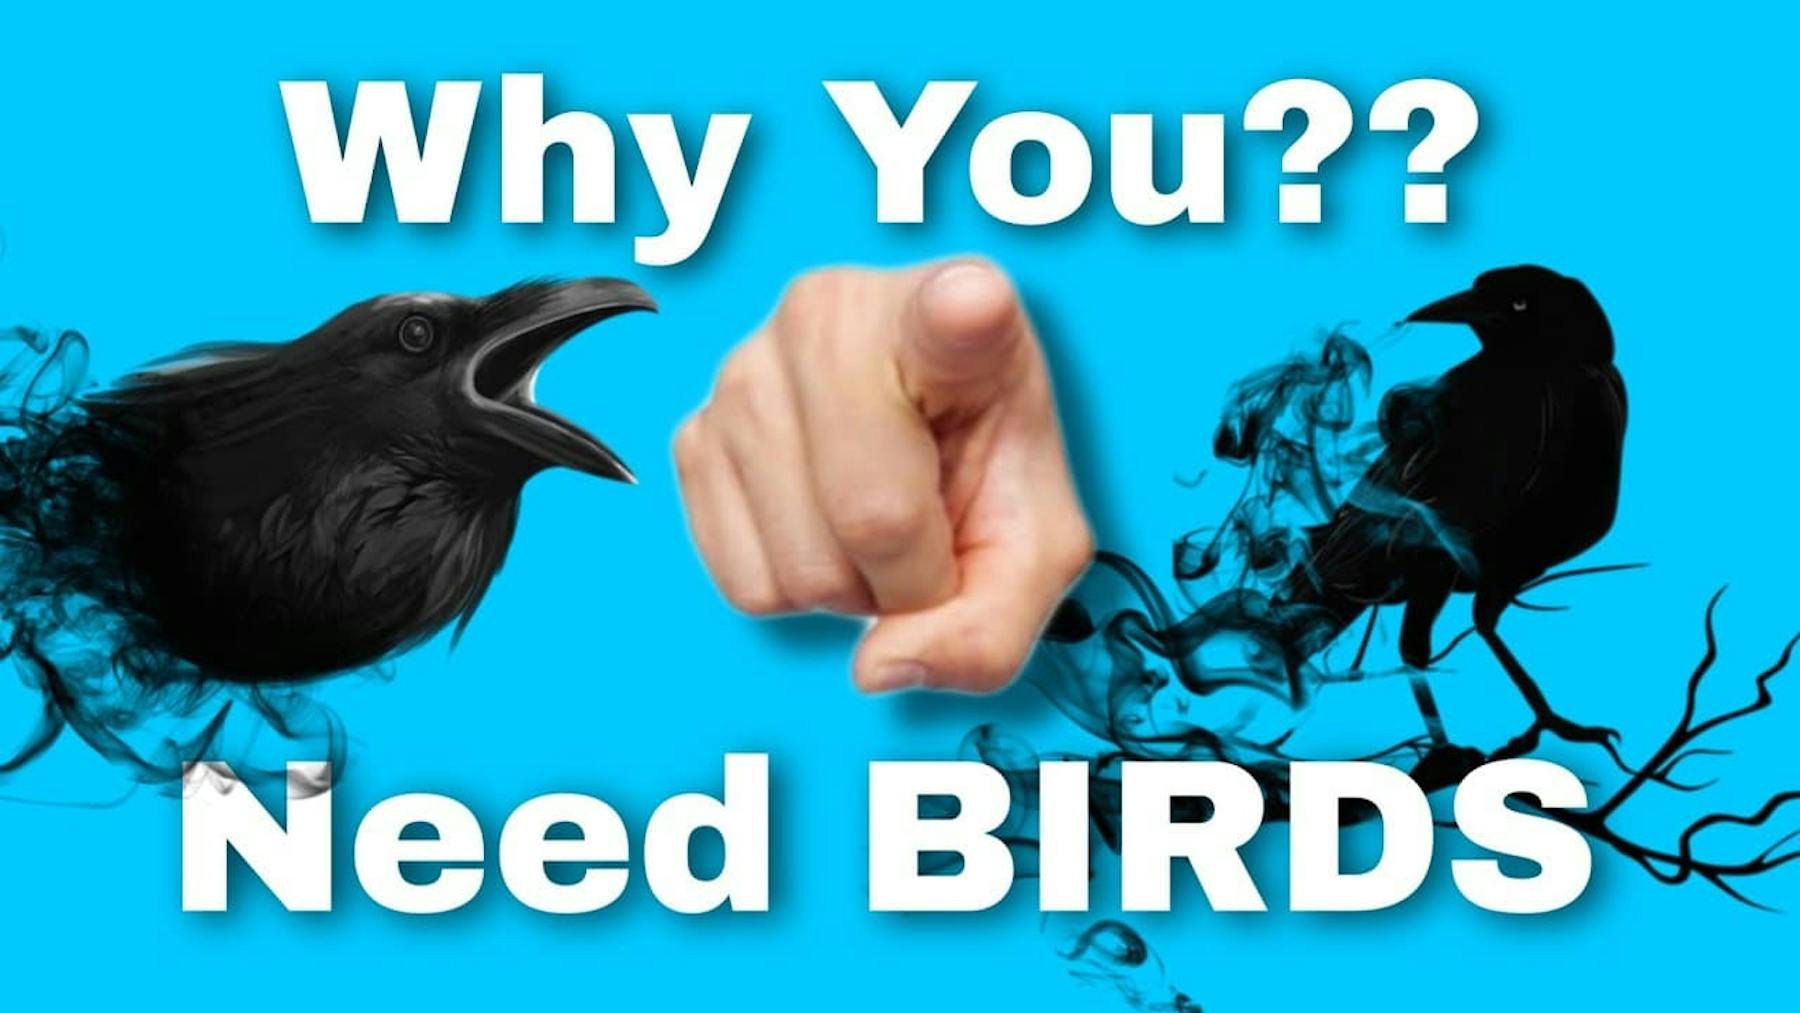 why you need birds with black crows and pointing hand